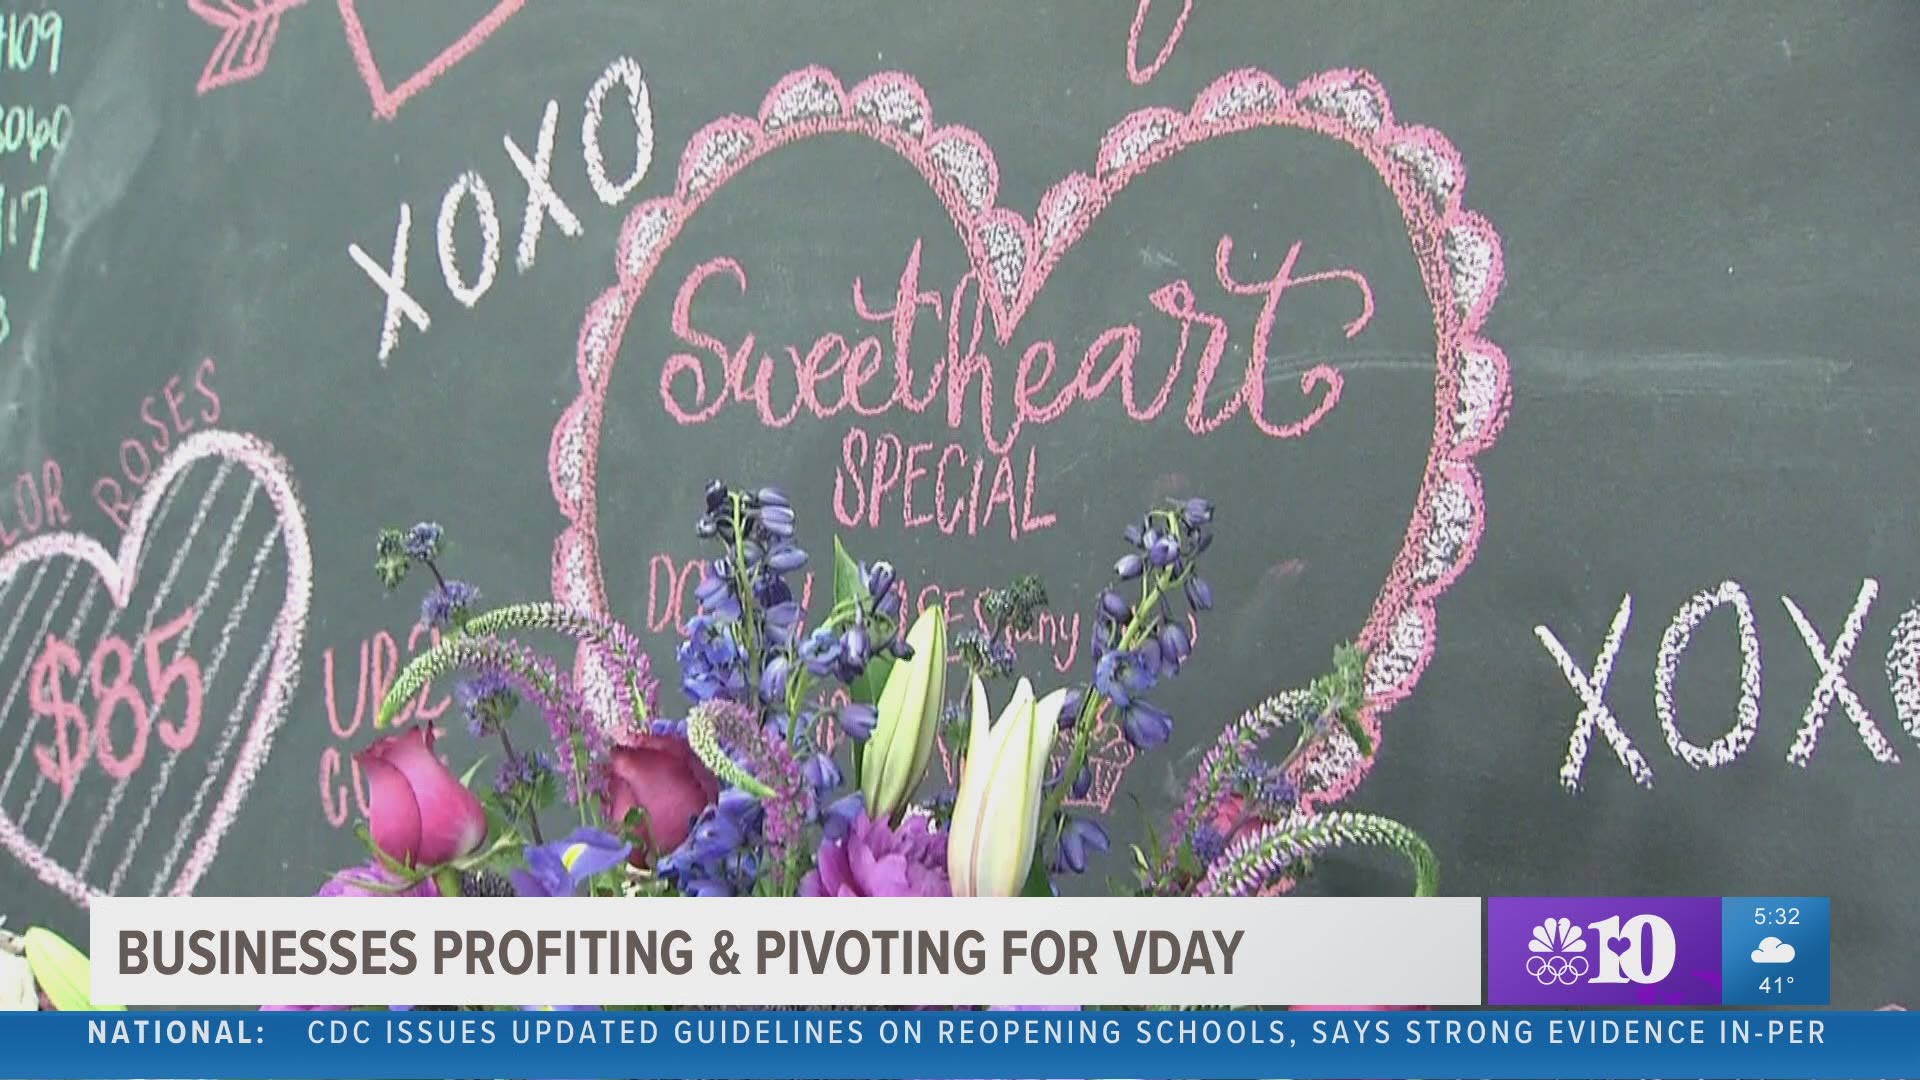 Flower shops, candy stores and restaurants are finding ways to ensure the holiday of love is beneficial for everyone involved.